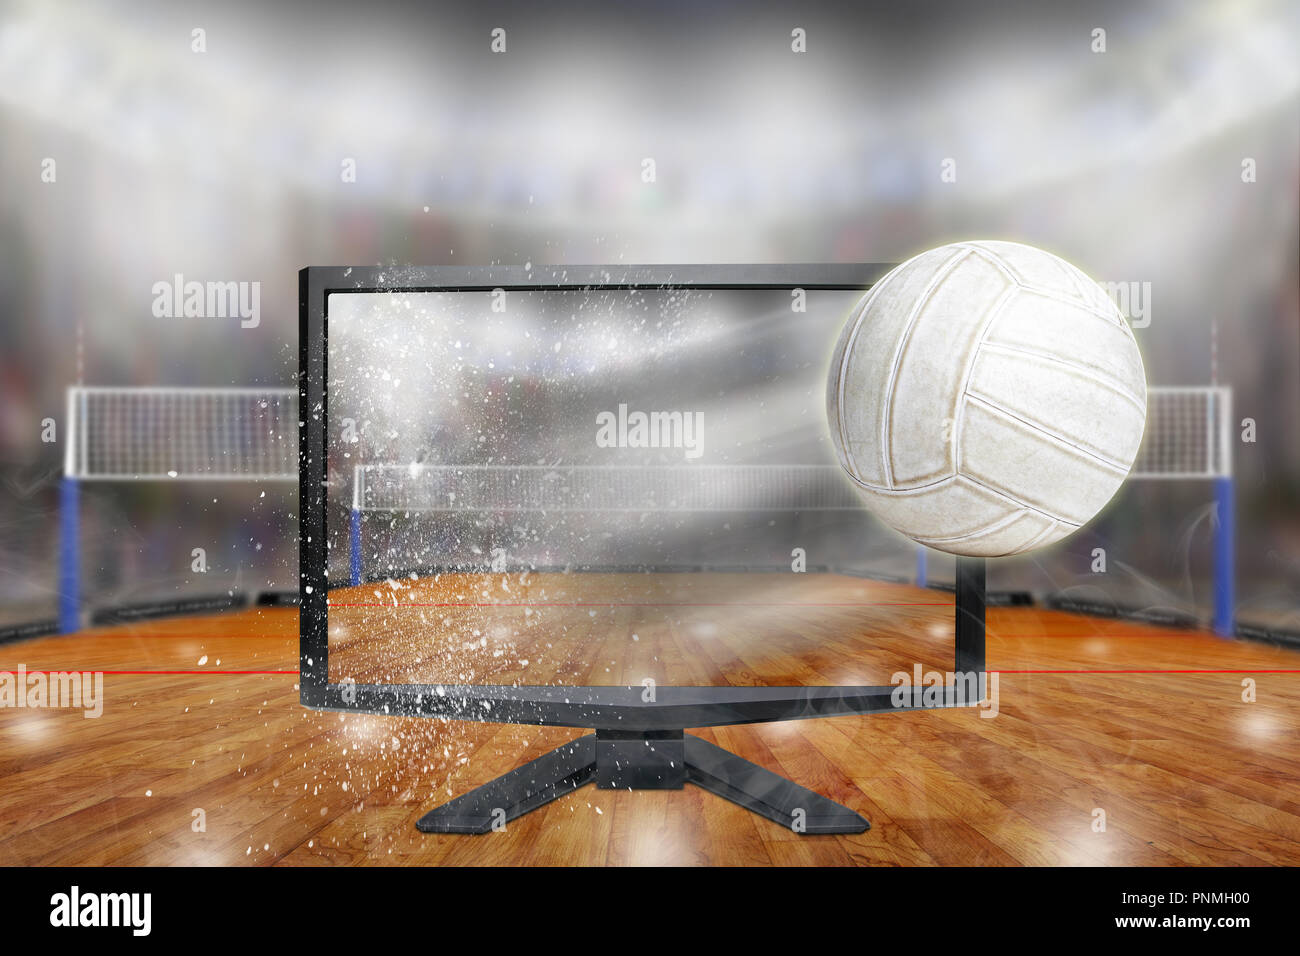 Volleyball flying out of shattering TV screen in arena with copy space